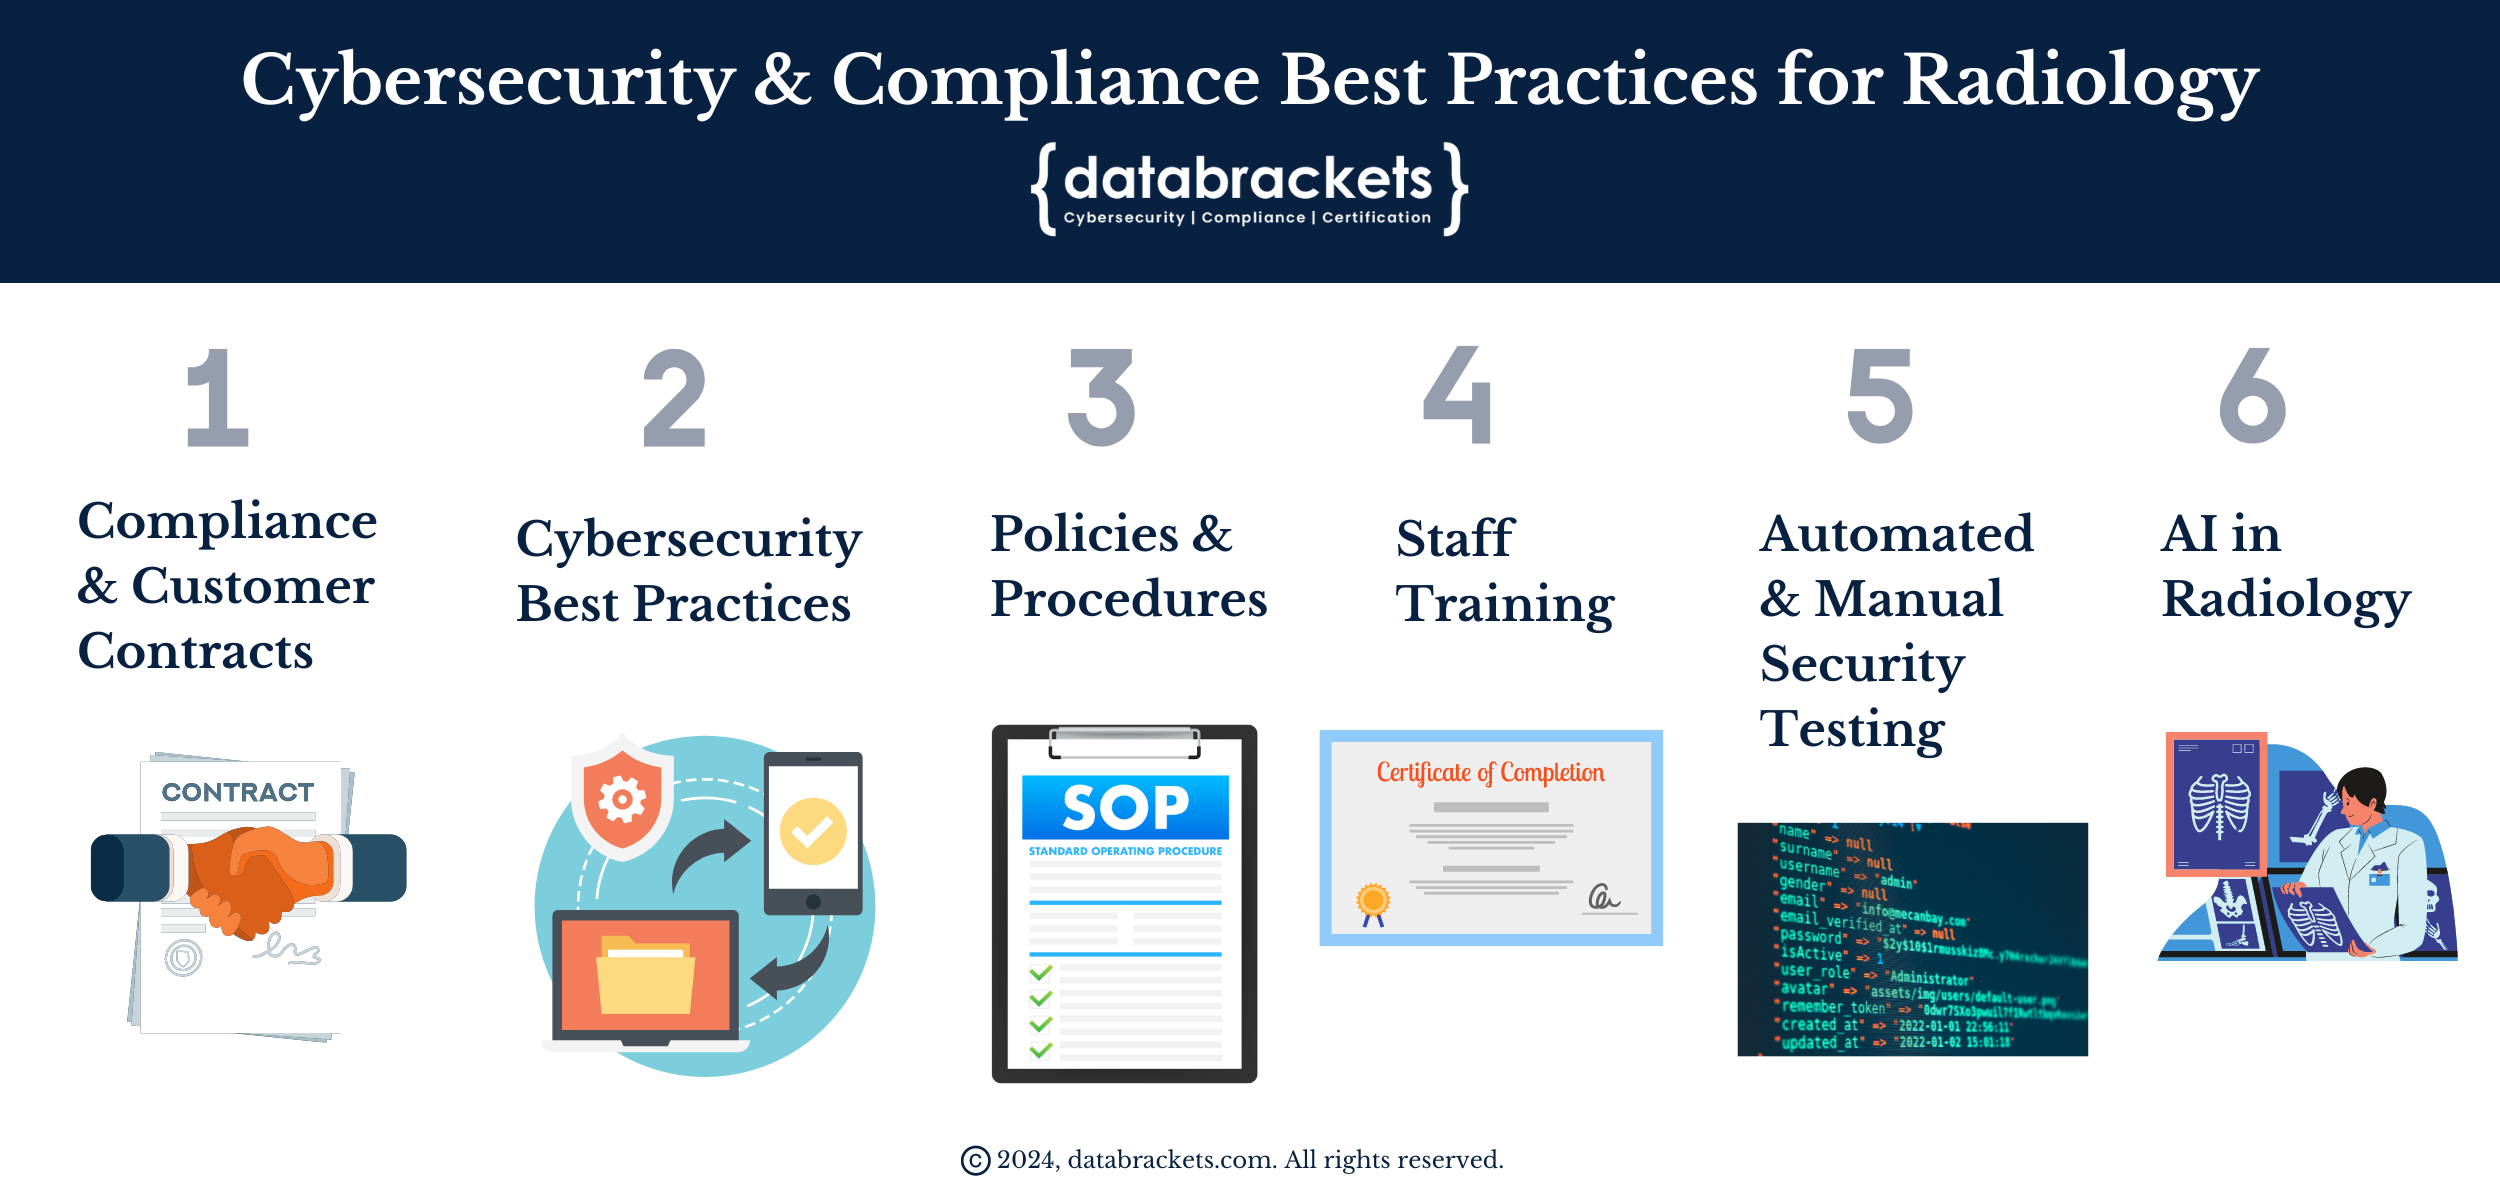 Cybersecurity Best Practices for Radiology